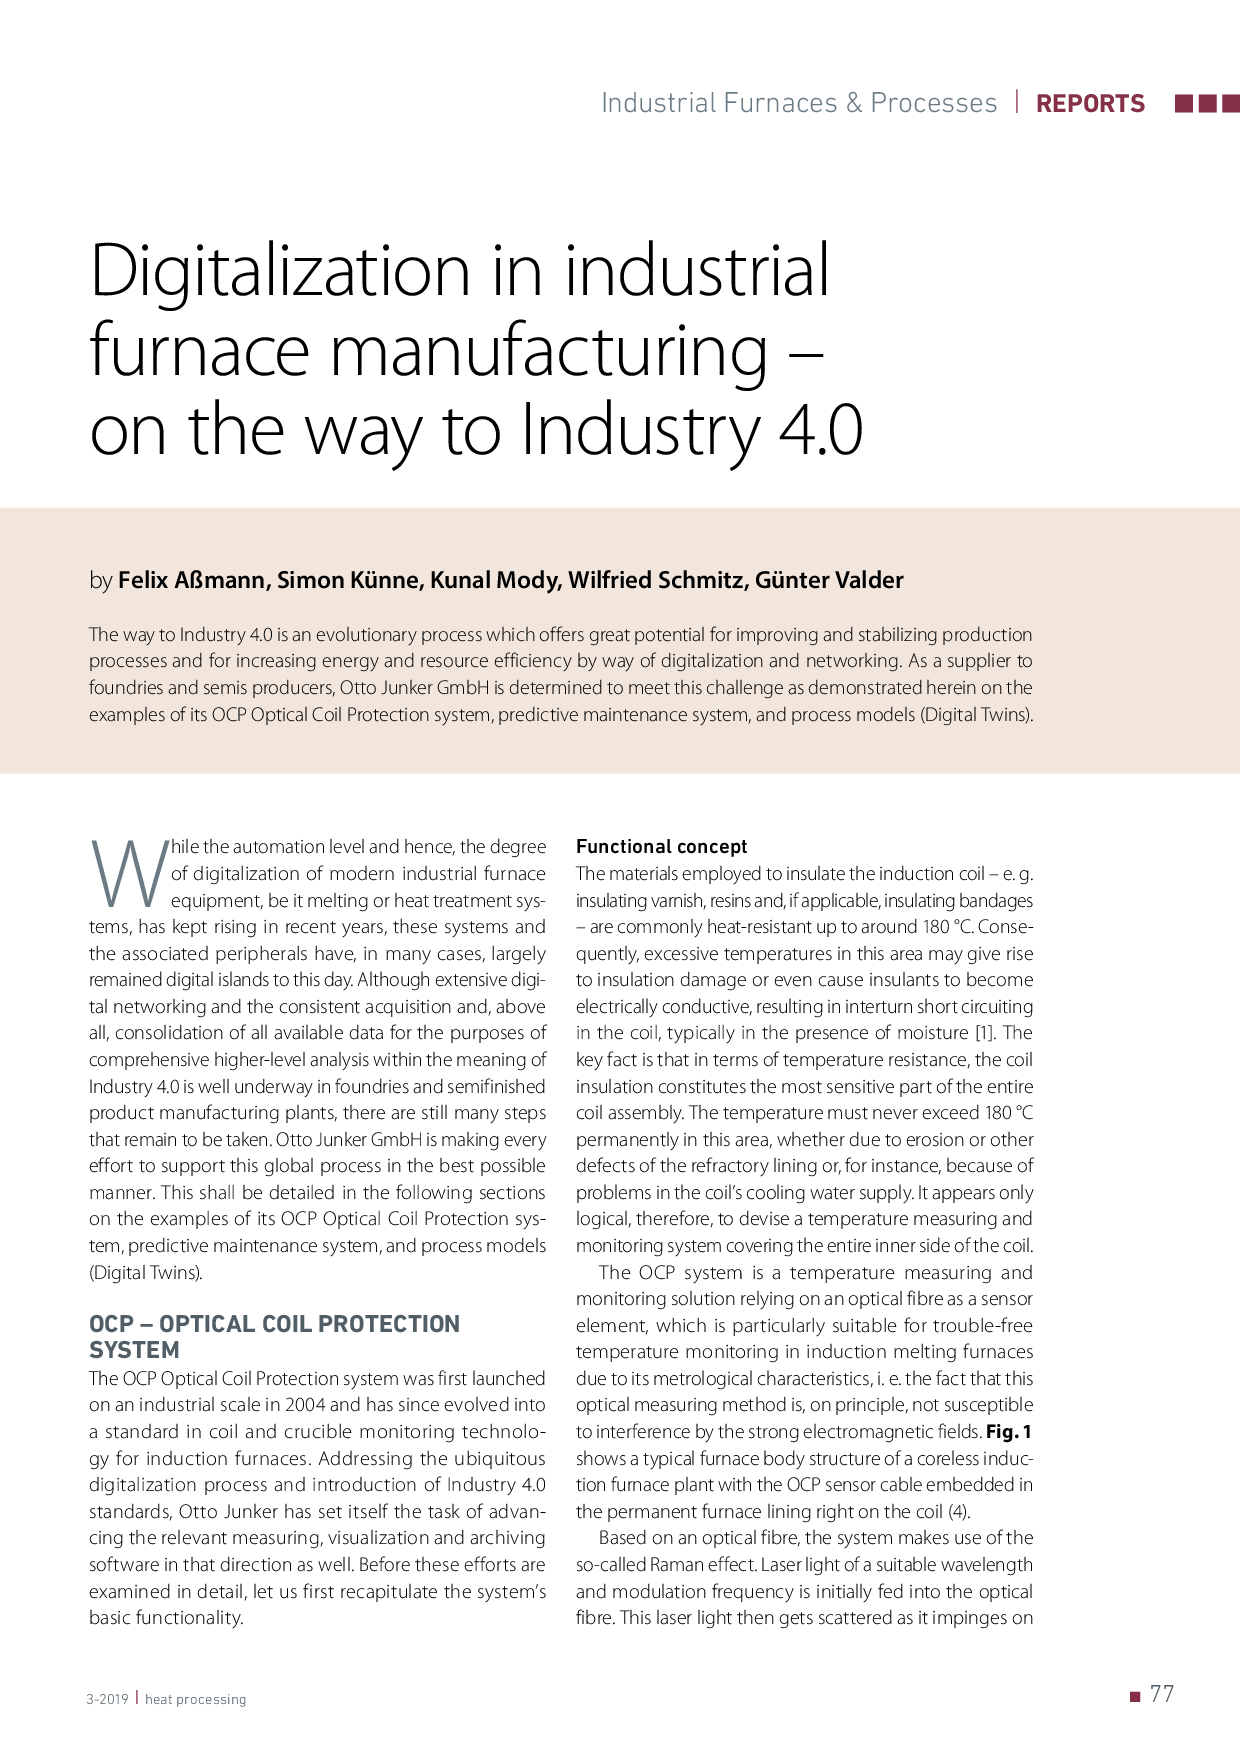 Digitalization in industrial furnace manufacturing – on the way to Industry 4.0